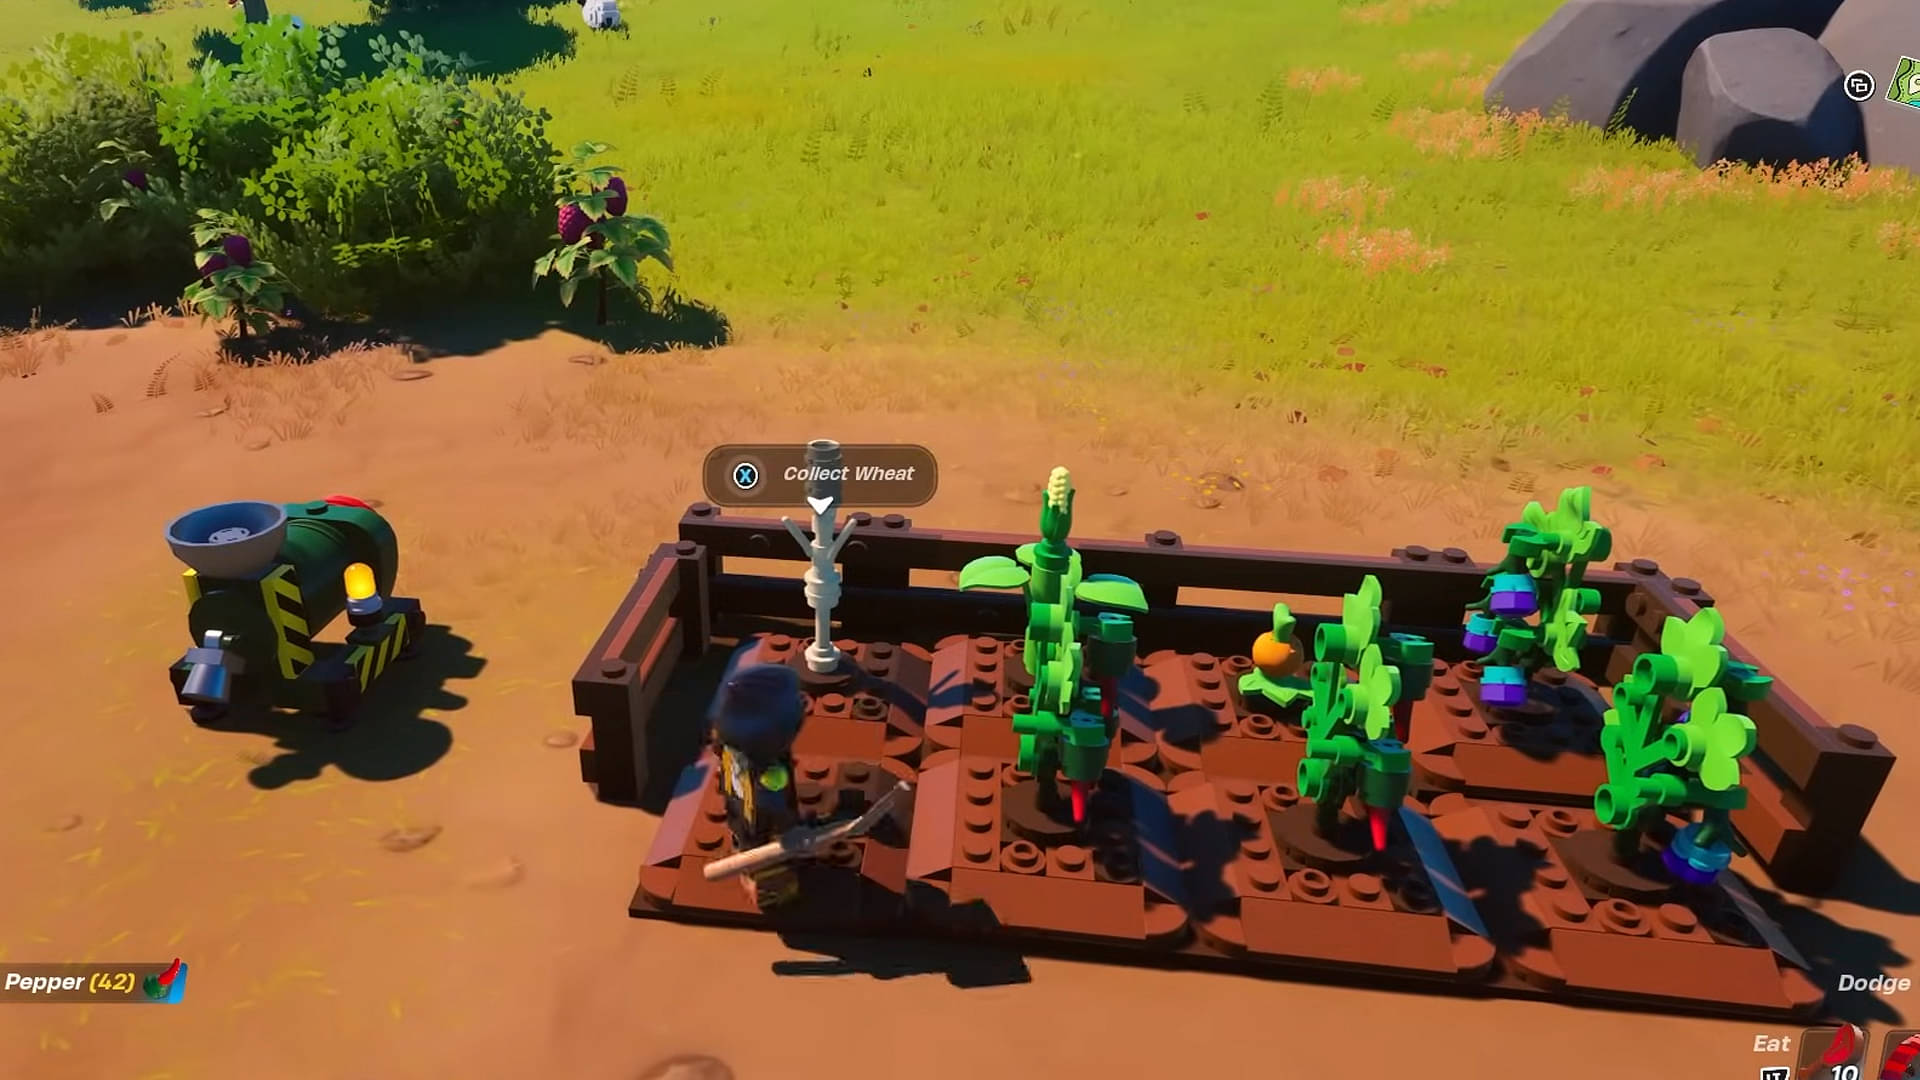 An image showing farming in Lego Fortnite